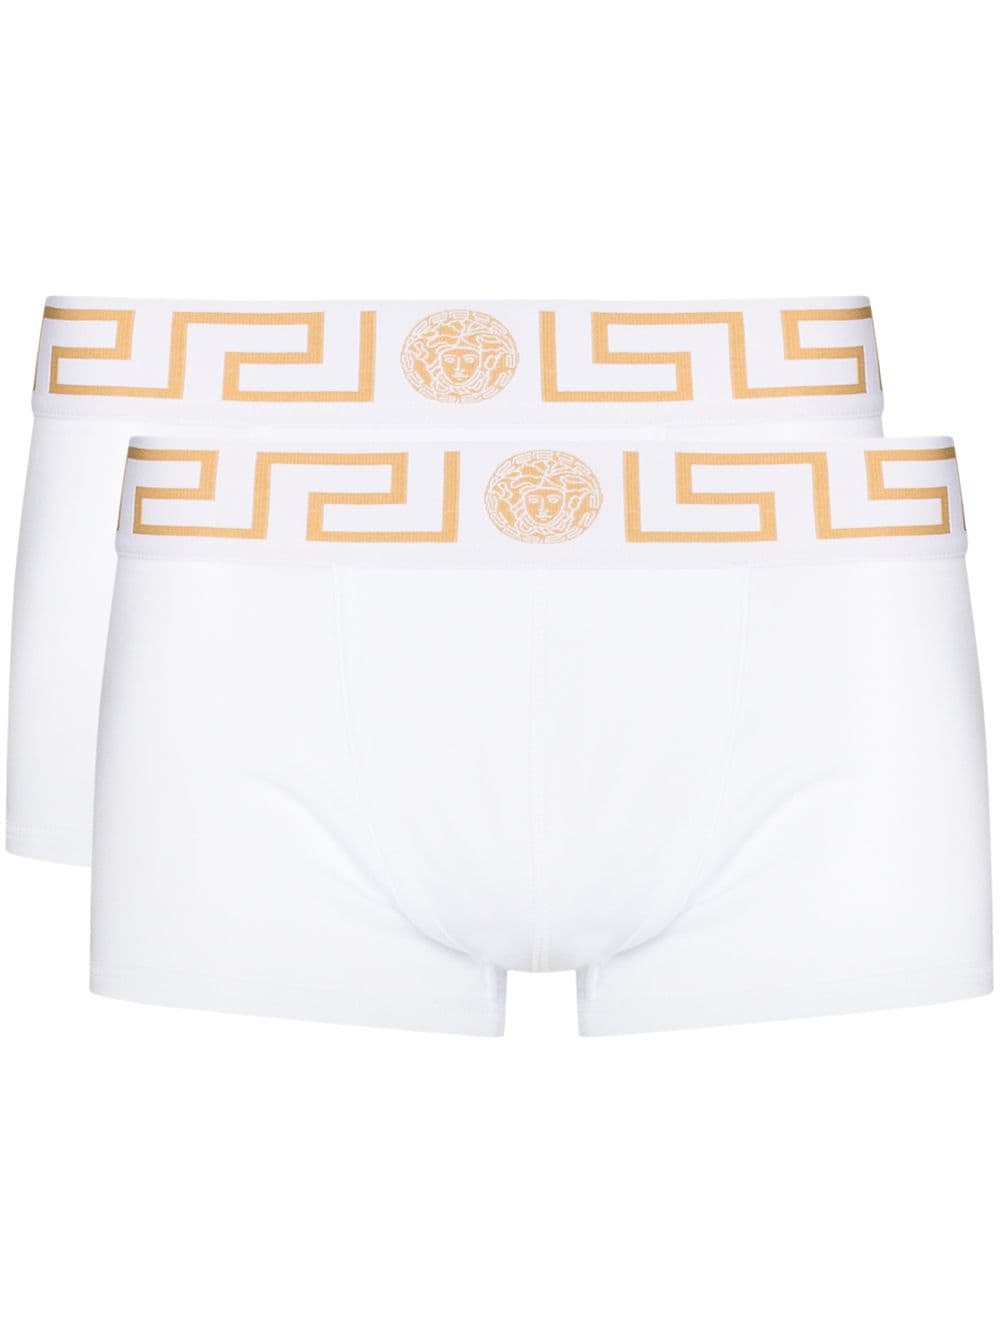 Versace pack of two Greca logo boxers - White